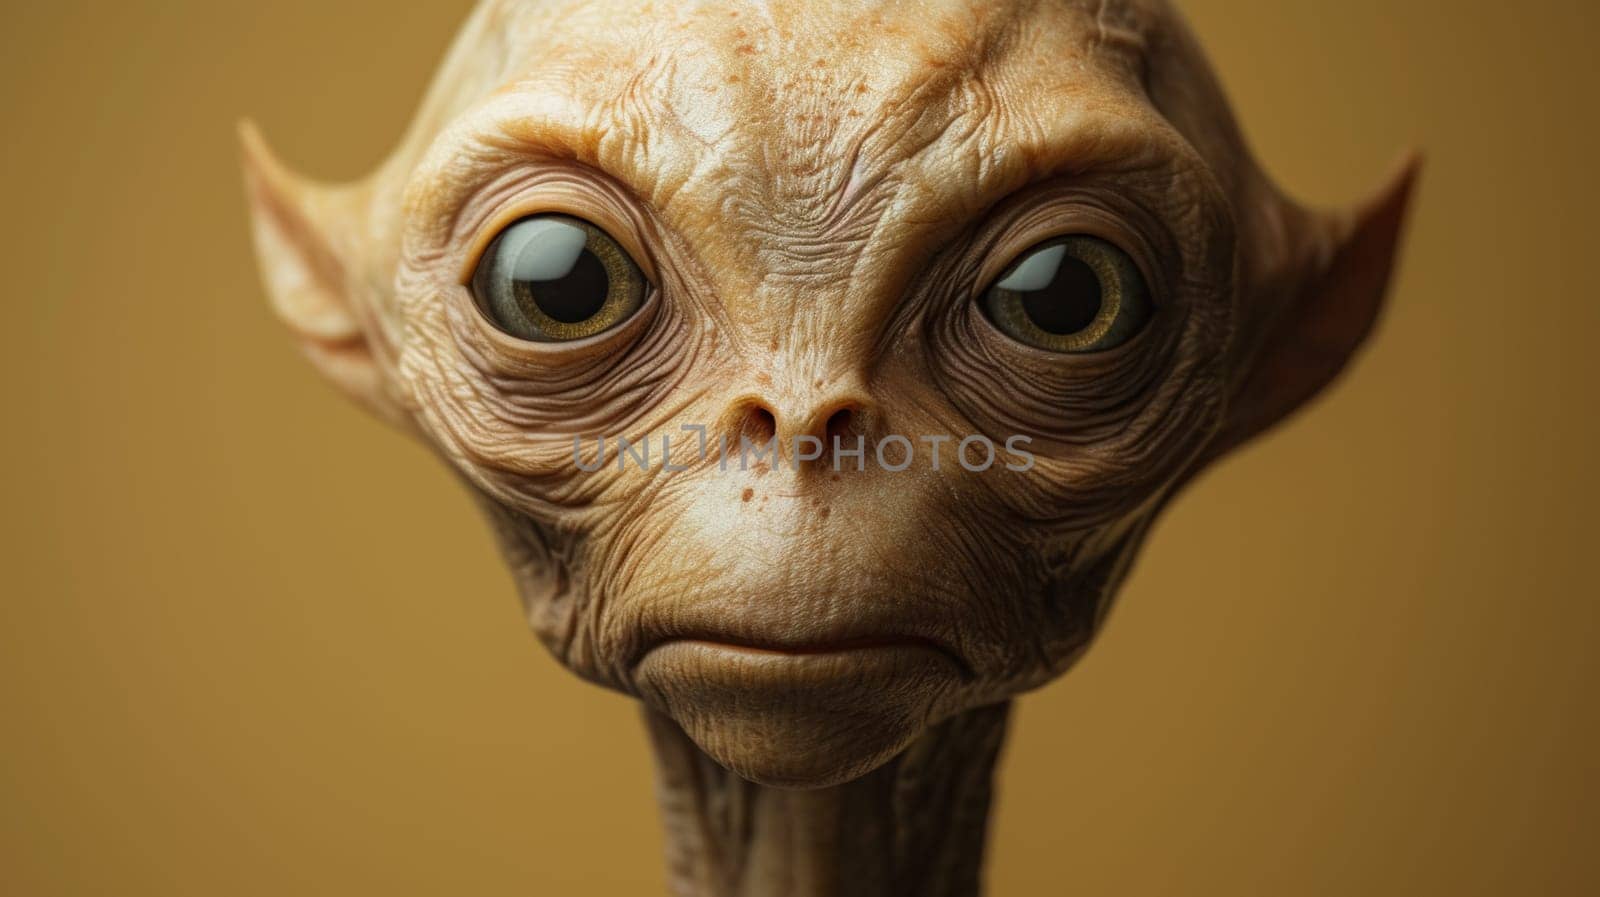 A close up of a weird looking alien head on a brown background